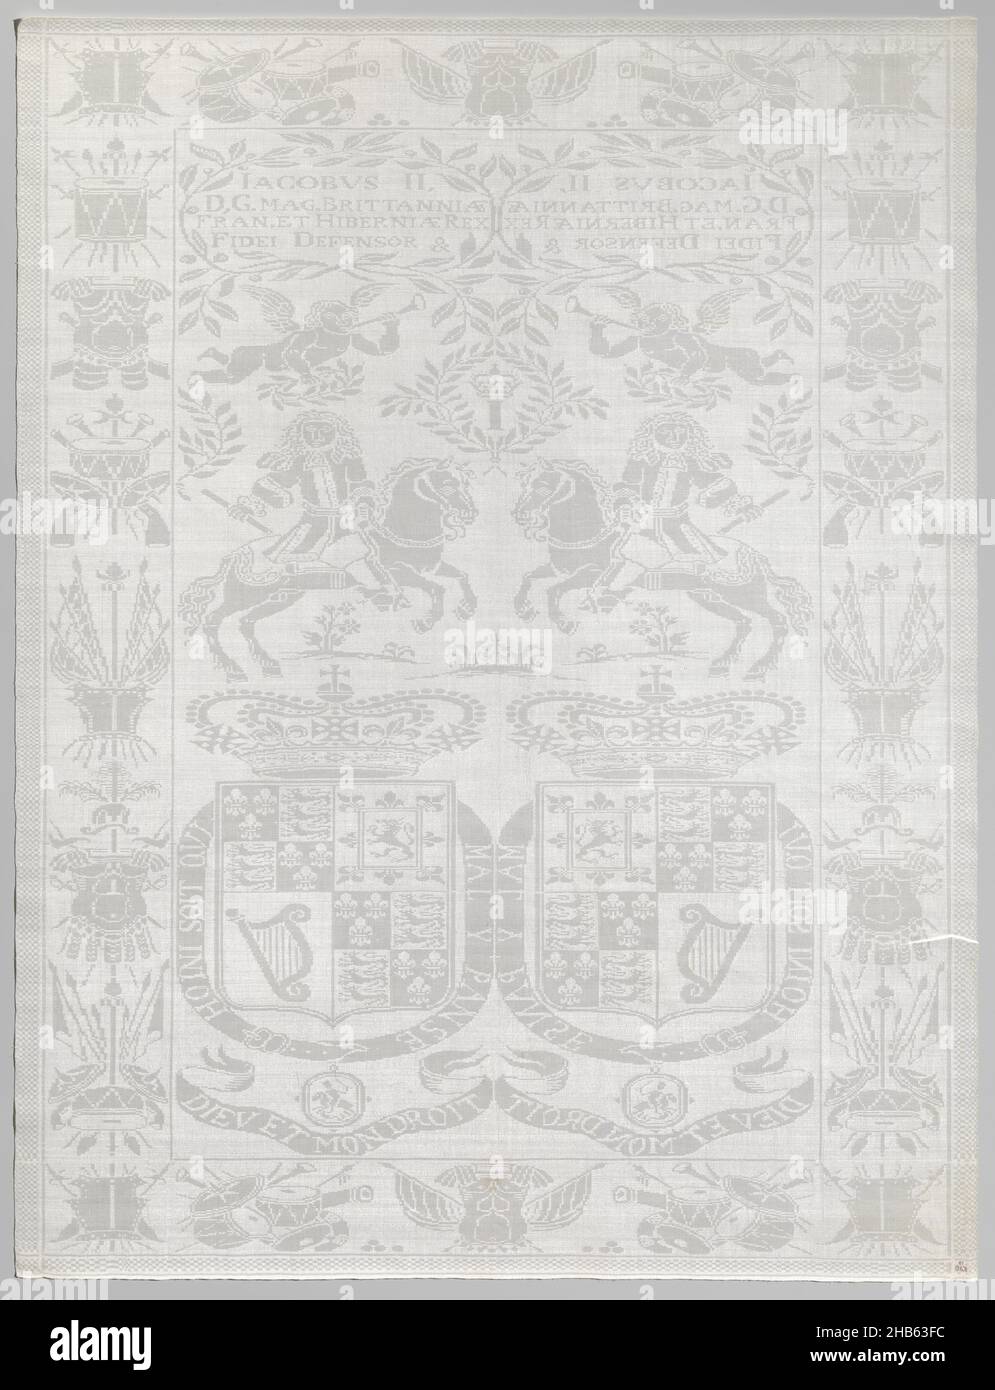 Napkin with James II of England, Napkin of linen damask with James II of England. Midfield: The symmetrically doubled pattern shows from bottom to top two scenes; 1 Large crowned coat of arms of Great Britain and Ireland, surrounded by the garter, on which hangs HONI SOIT QUI MAL Y PANSE, and from which hangs the badge of order of St. George. Below that, a band of text with DIEU ET MON DROIT. 2 Seated on a center-turned, galloping horse is James, with low allonge wig, lace jabot dated after 1670 and marshal's staff. Above the horse's head the crowned letter I in a laurel wreath. Above James a Stock Photo